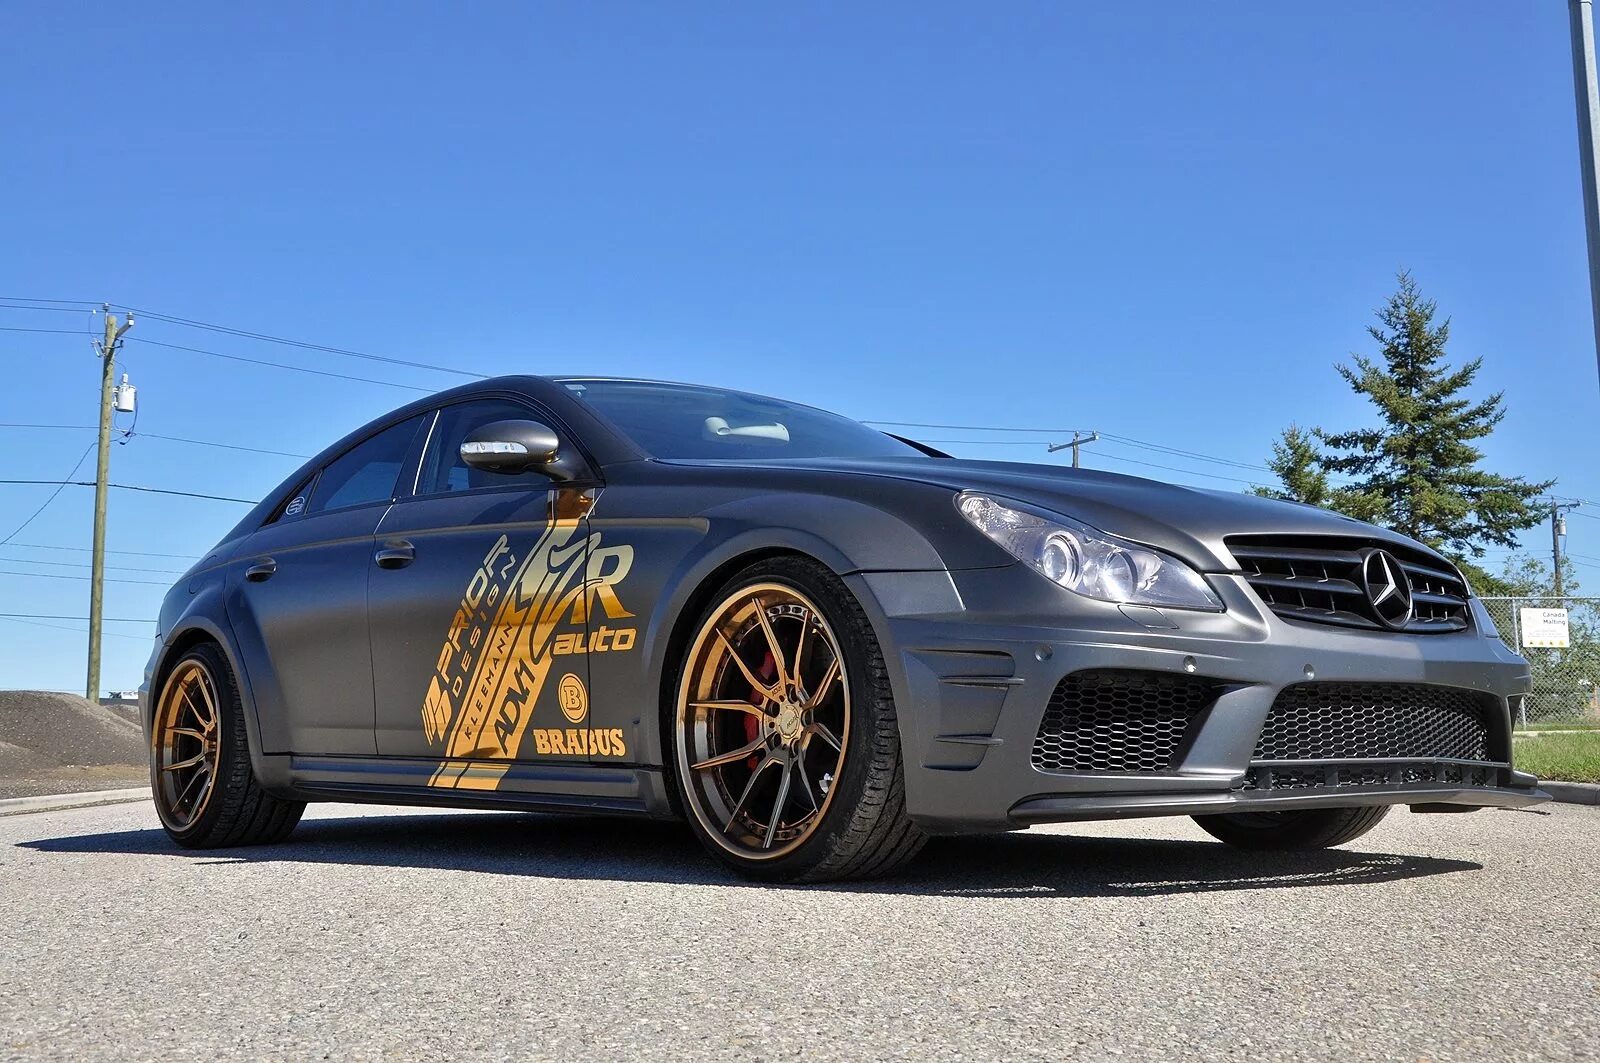 Mercedes Benz CLS 55 AMG. CLS 63 AMG body Kit. Mercedes CLS 55 AMG Tuning. CLS 55 AMG Black колеса.